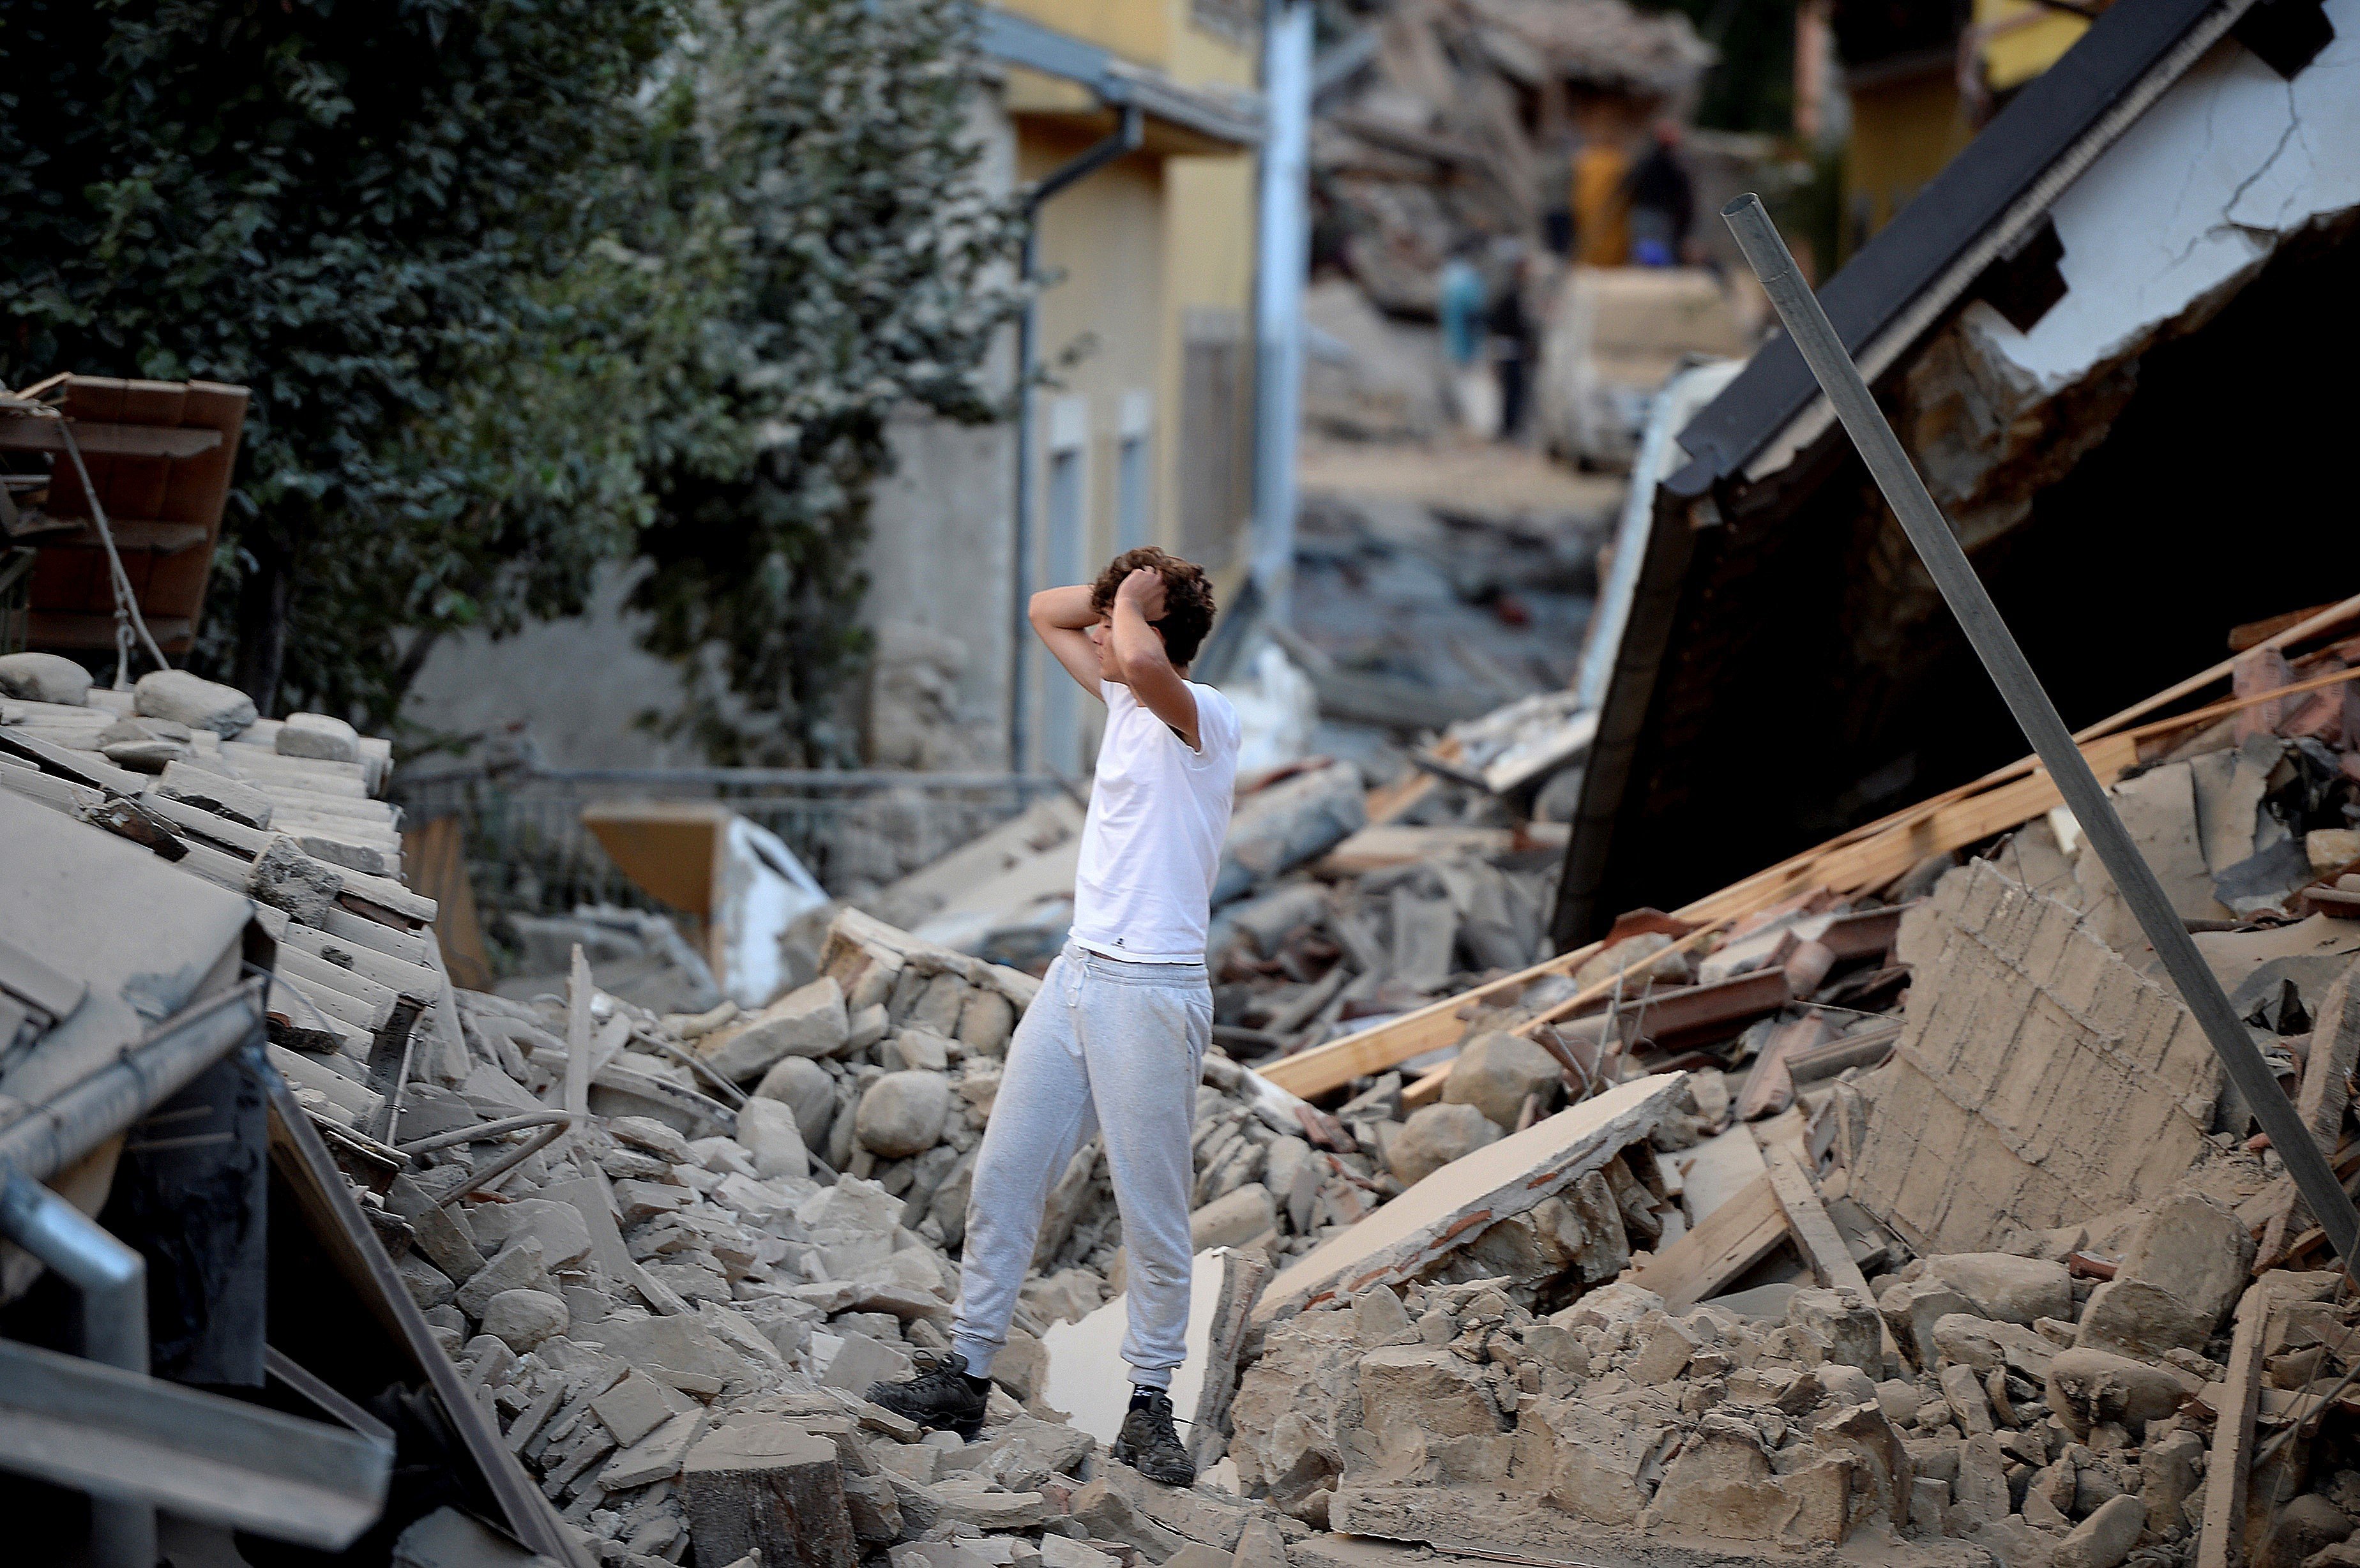 A man stands among damaged buildings after a strong earthquake hit Amatrice in central Italy on August 24, 2016. Photo: AFP